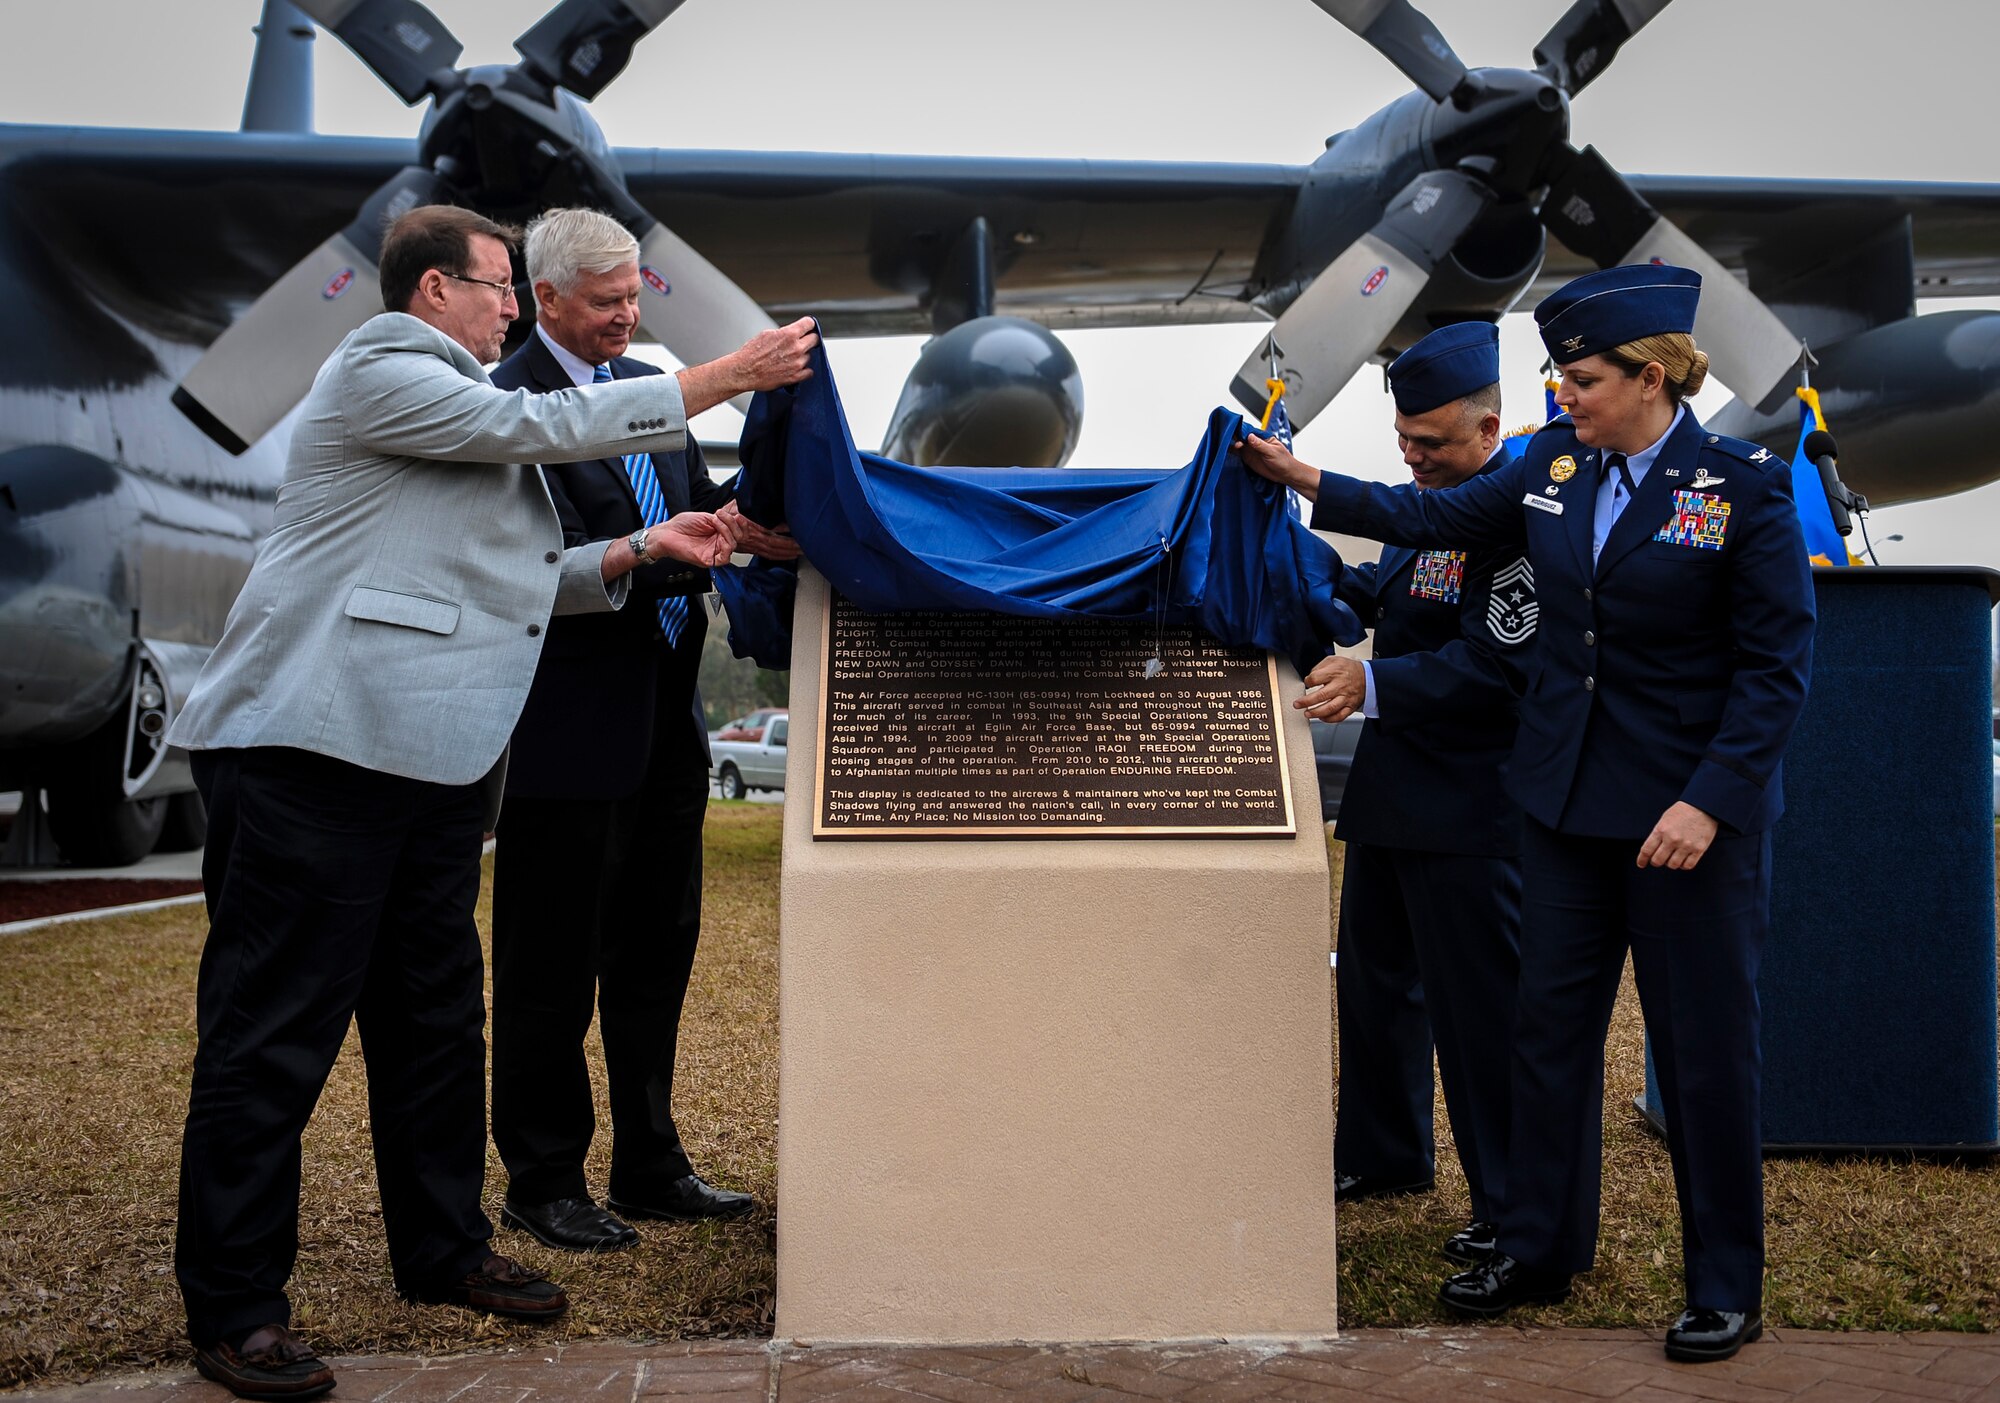 A plaque honoring the MC-130P Combat Shadow is unveiled during a dedication ceremony at Hurlburt Field, Fla., Feb. 2, 2016. The Combat Shadow supported Special Operations missions worldwide including: operations Just Cause, Desert Storm, Northern and Southern Watch, Deny Flight, Deliberate Force and Joint Endeavor.  After 9/11, the Combat Shadow supported Special Operations Forces during the final stages of Operation Iraqi Freedom and deployed multiple times as part of Operation Enduring Freedom. (U.S. Air Force photo by Senior Airman Meagan Schutter)